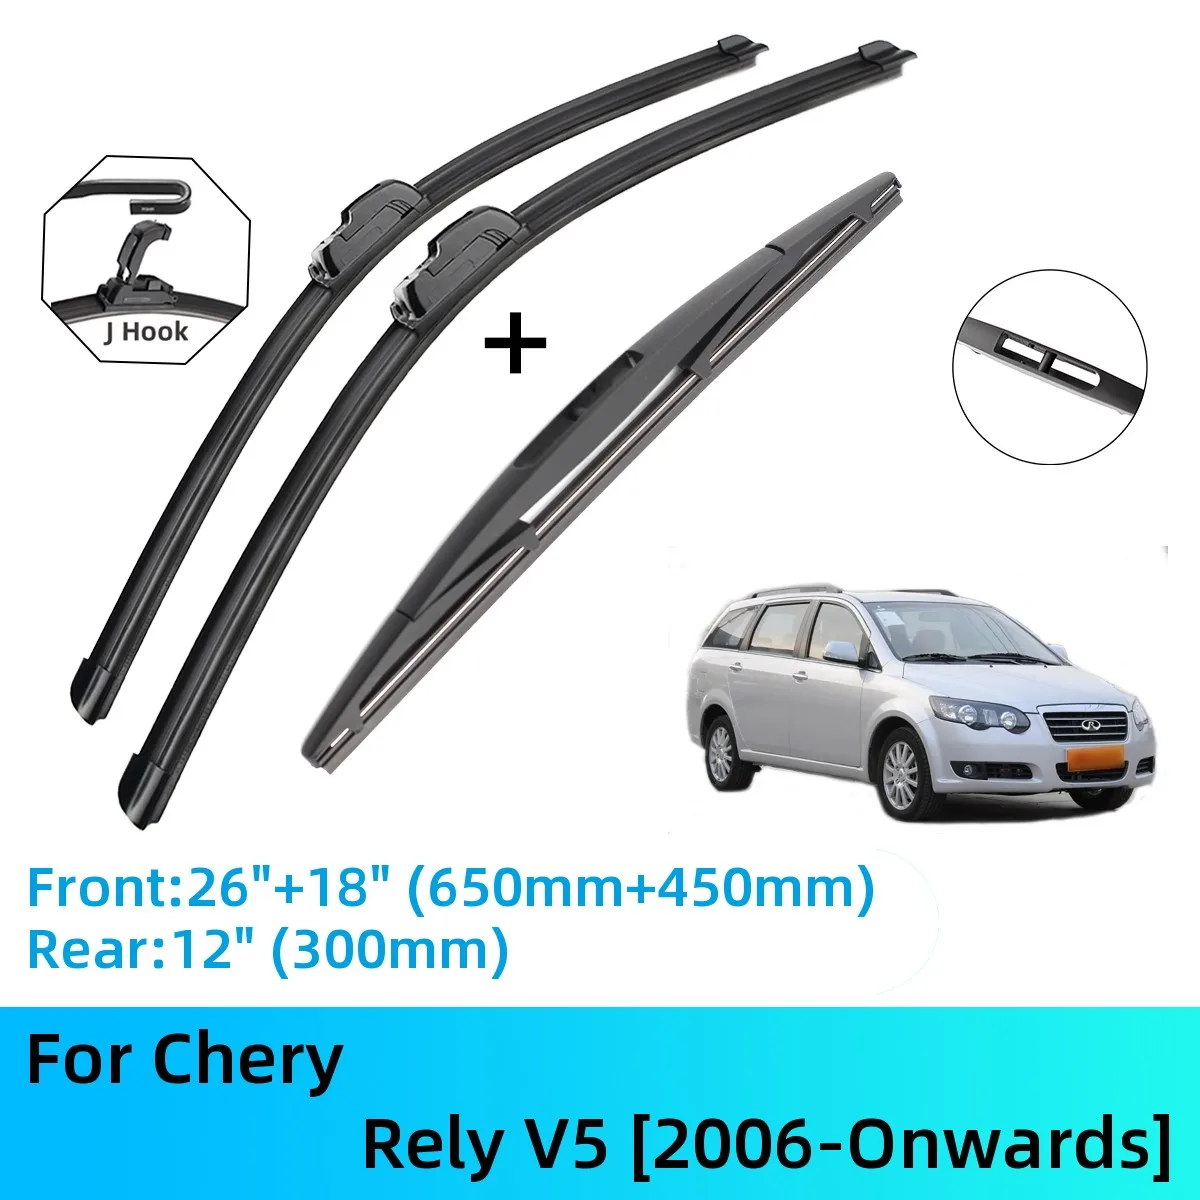 

For Chery Rely V5 Front Rear Wiper Blades Brushes Cutter Accessories J U Hook 2006-2021 2020 2019 2018 2017 2016 2015 2014 2013